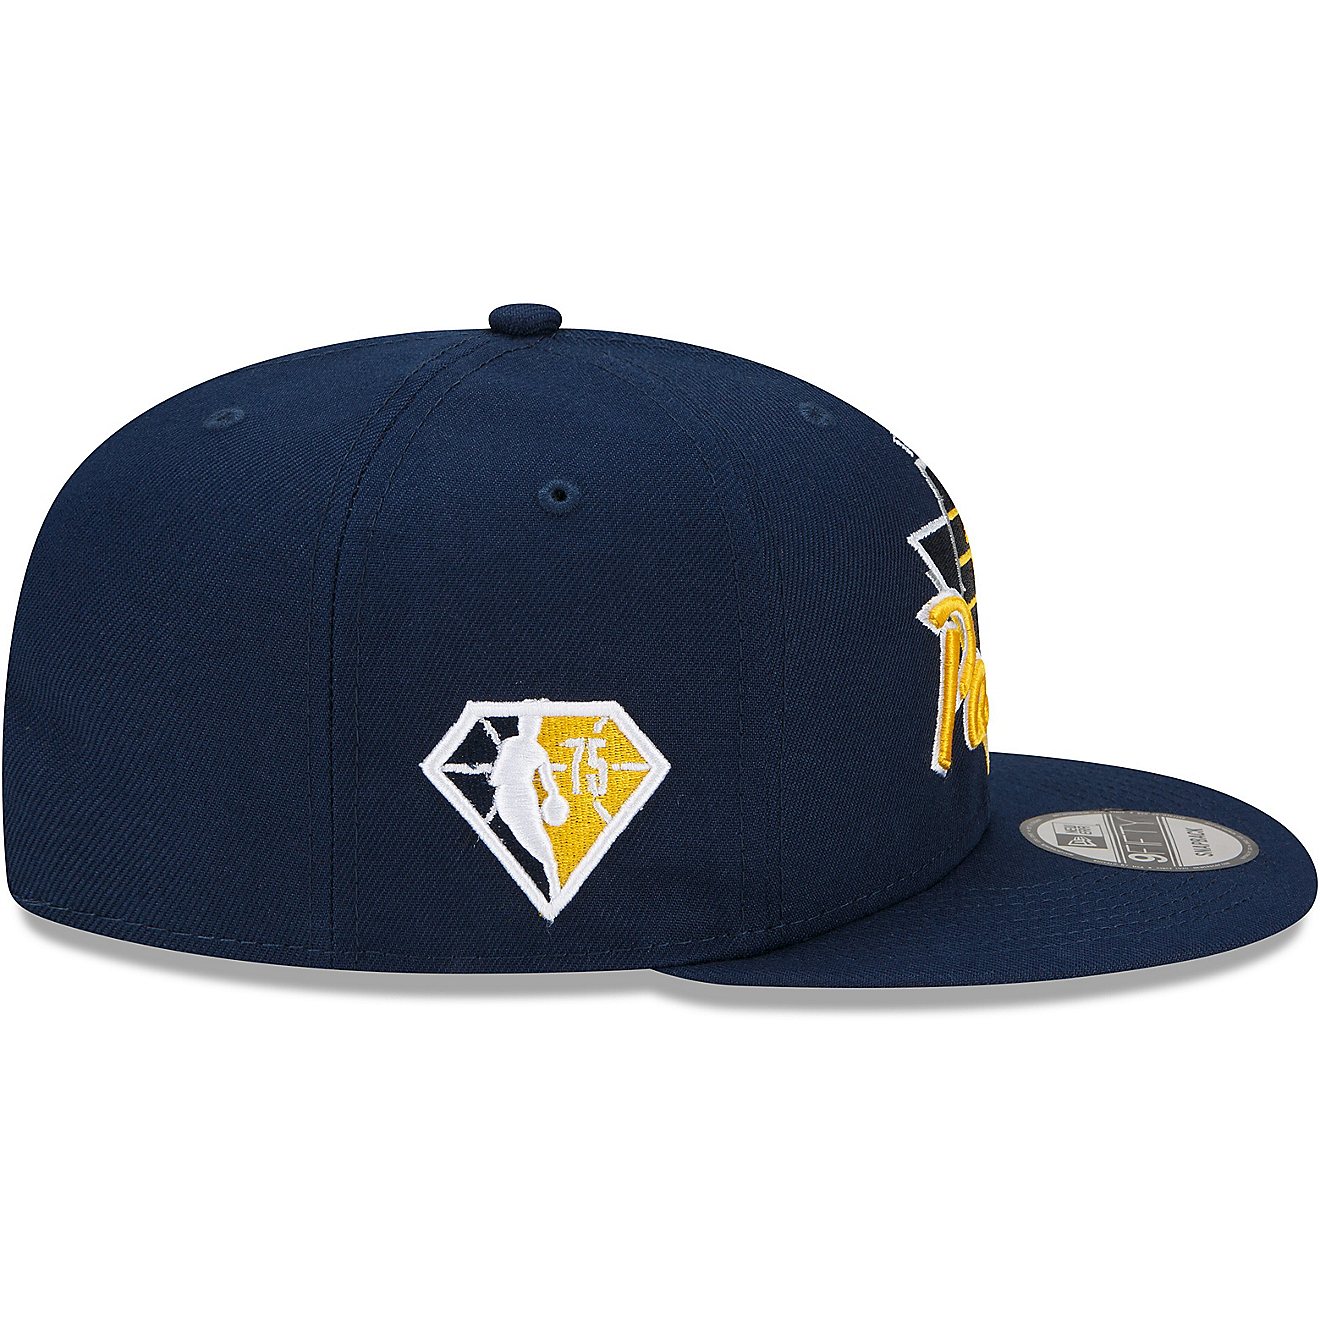 New Era Men's Indiana Pacers '21 Tip Off 9FIFTY Cap                                                                              - view number 6